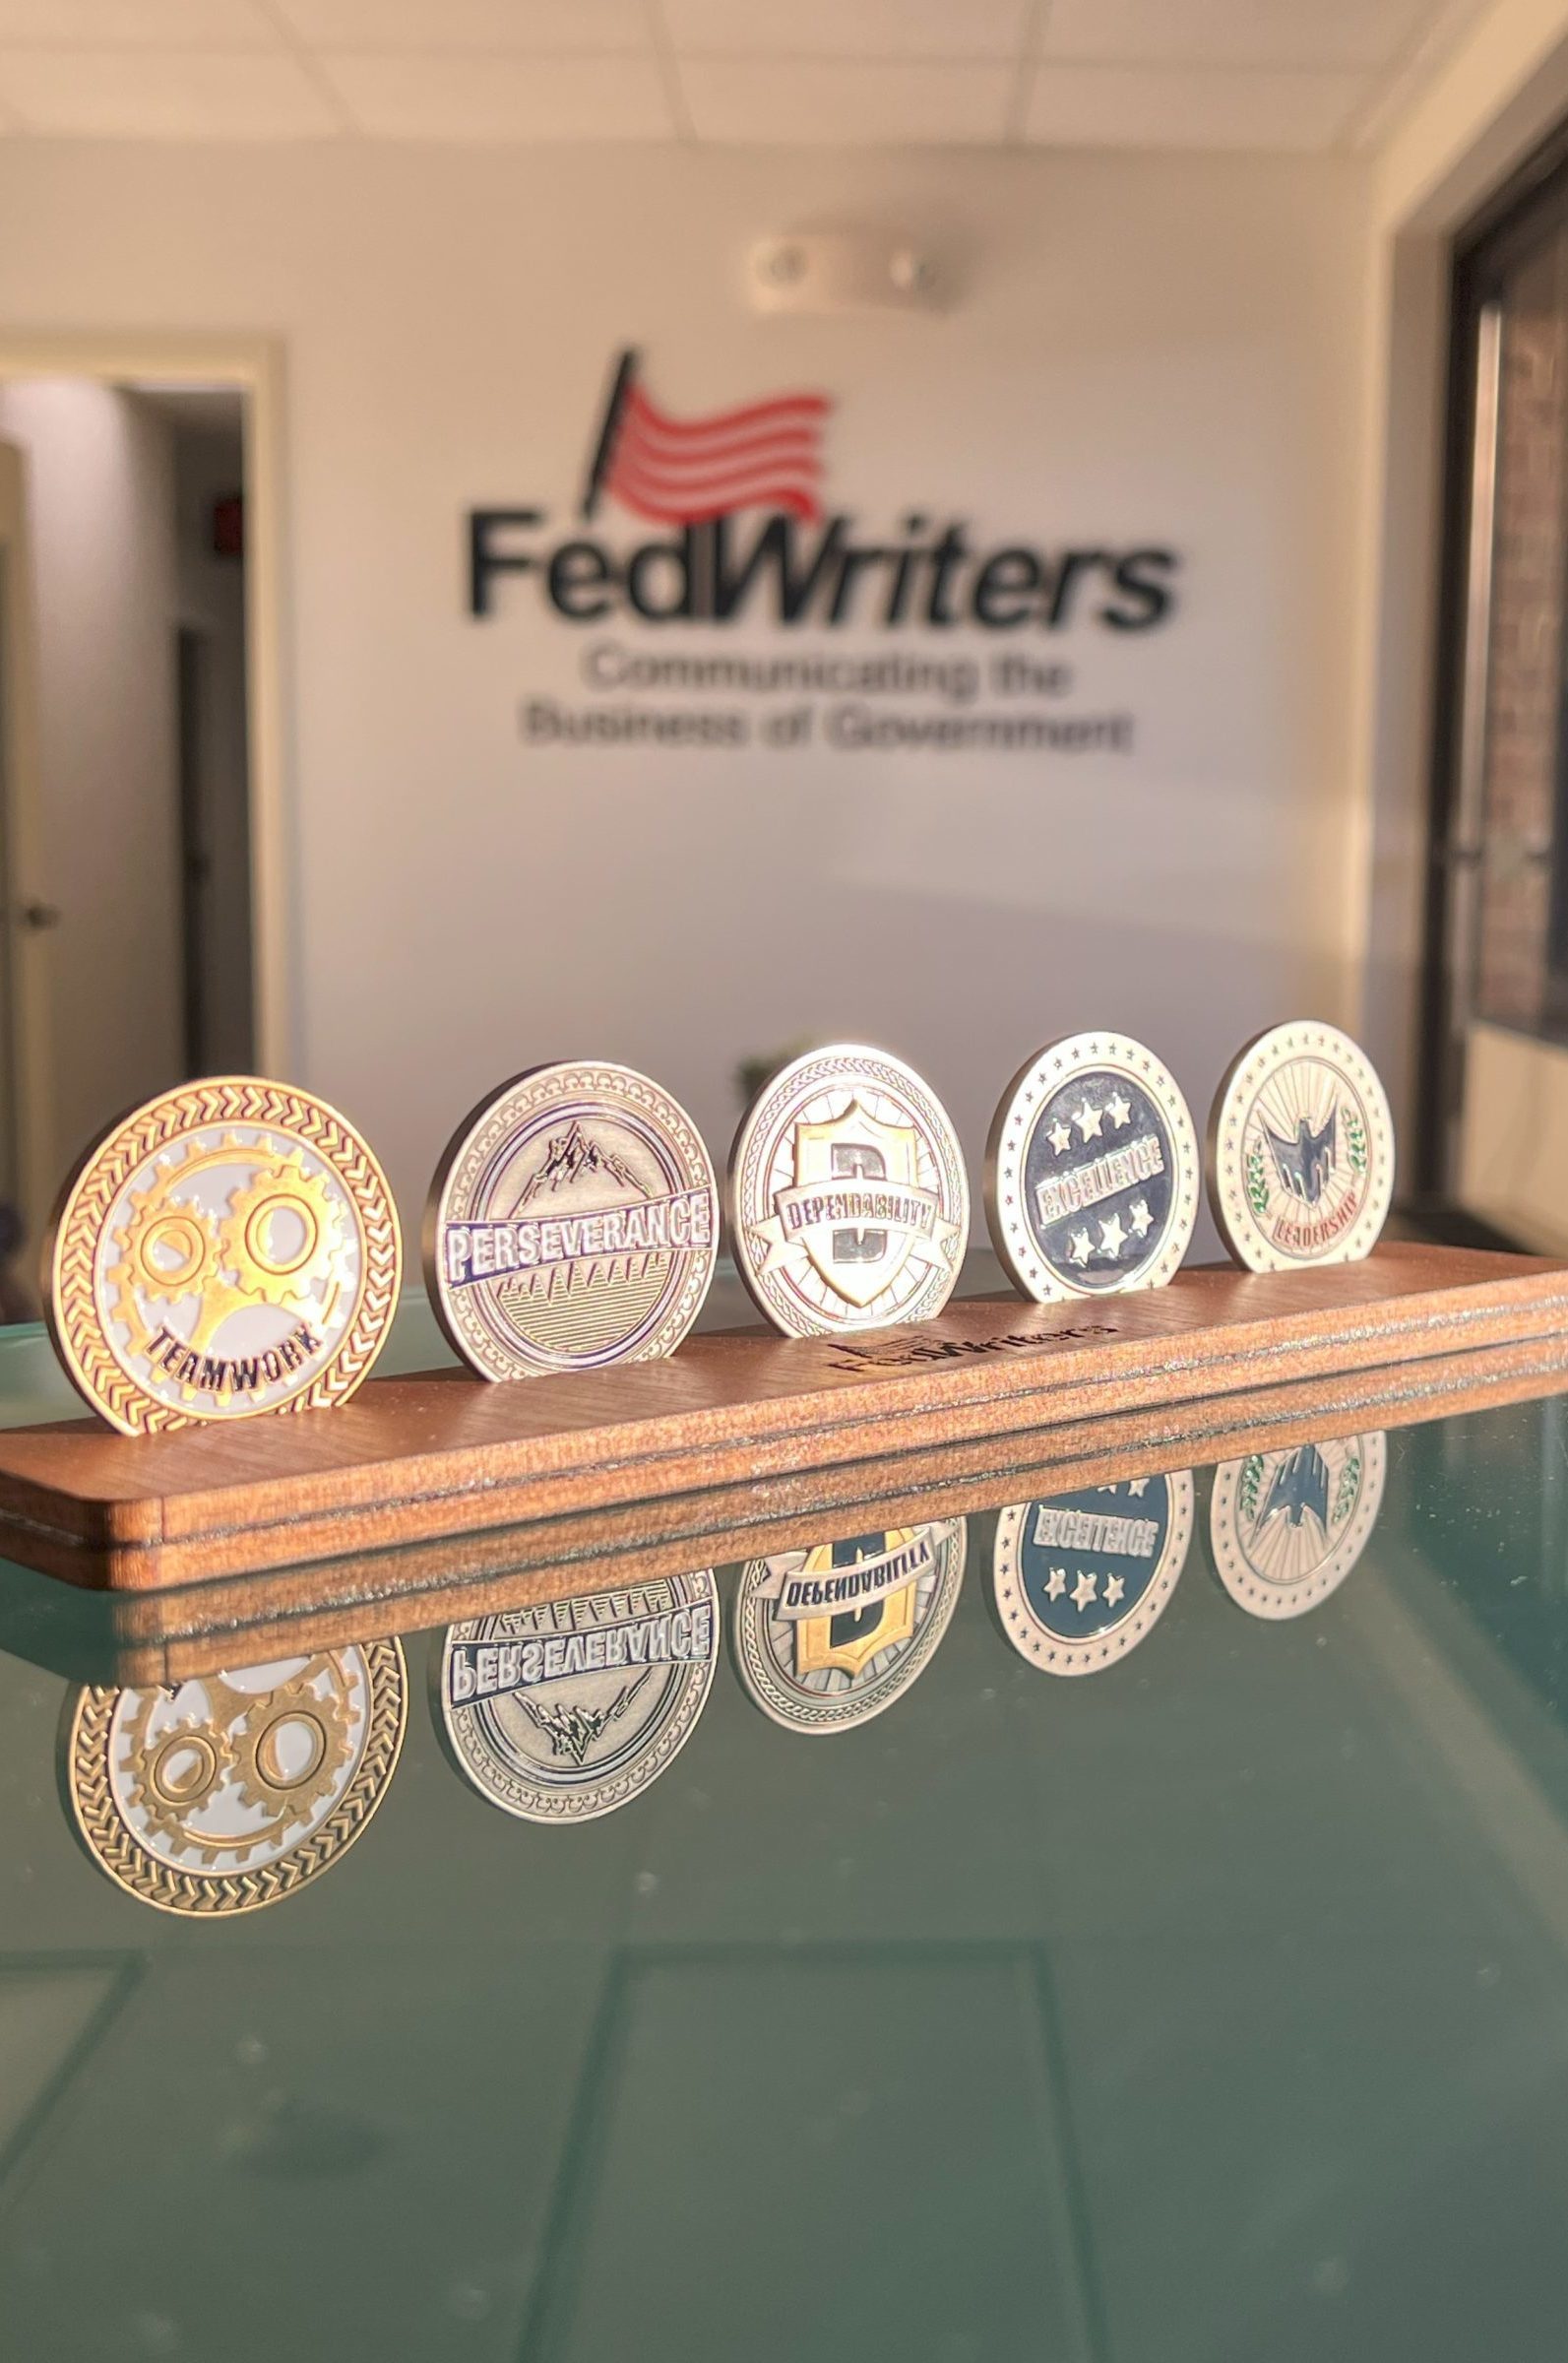 All 5 FedWriters' challenge coins standing in custom holder.